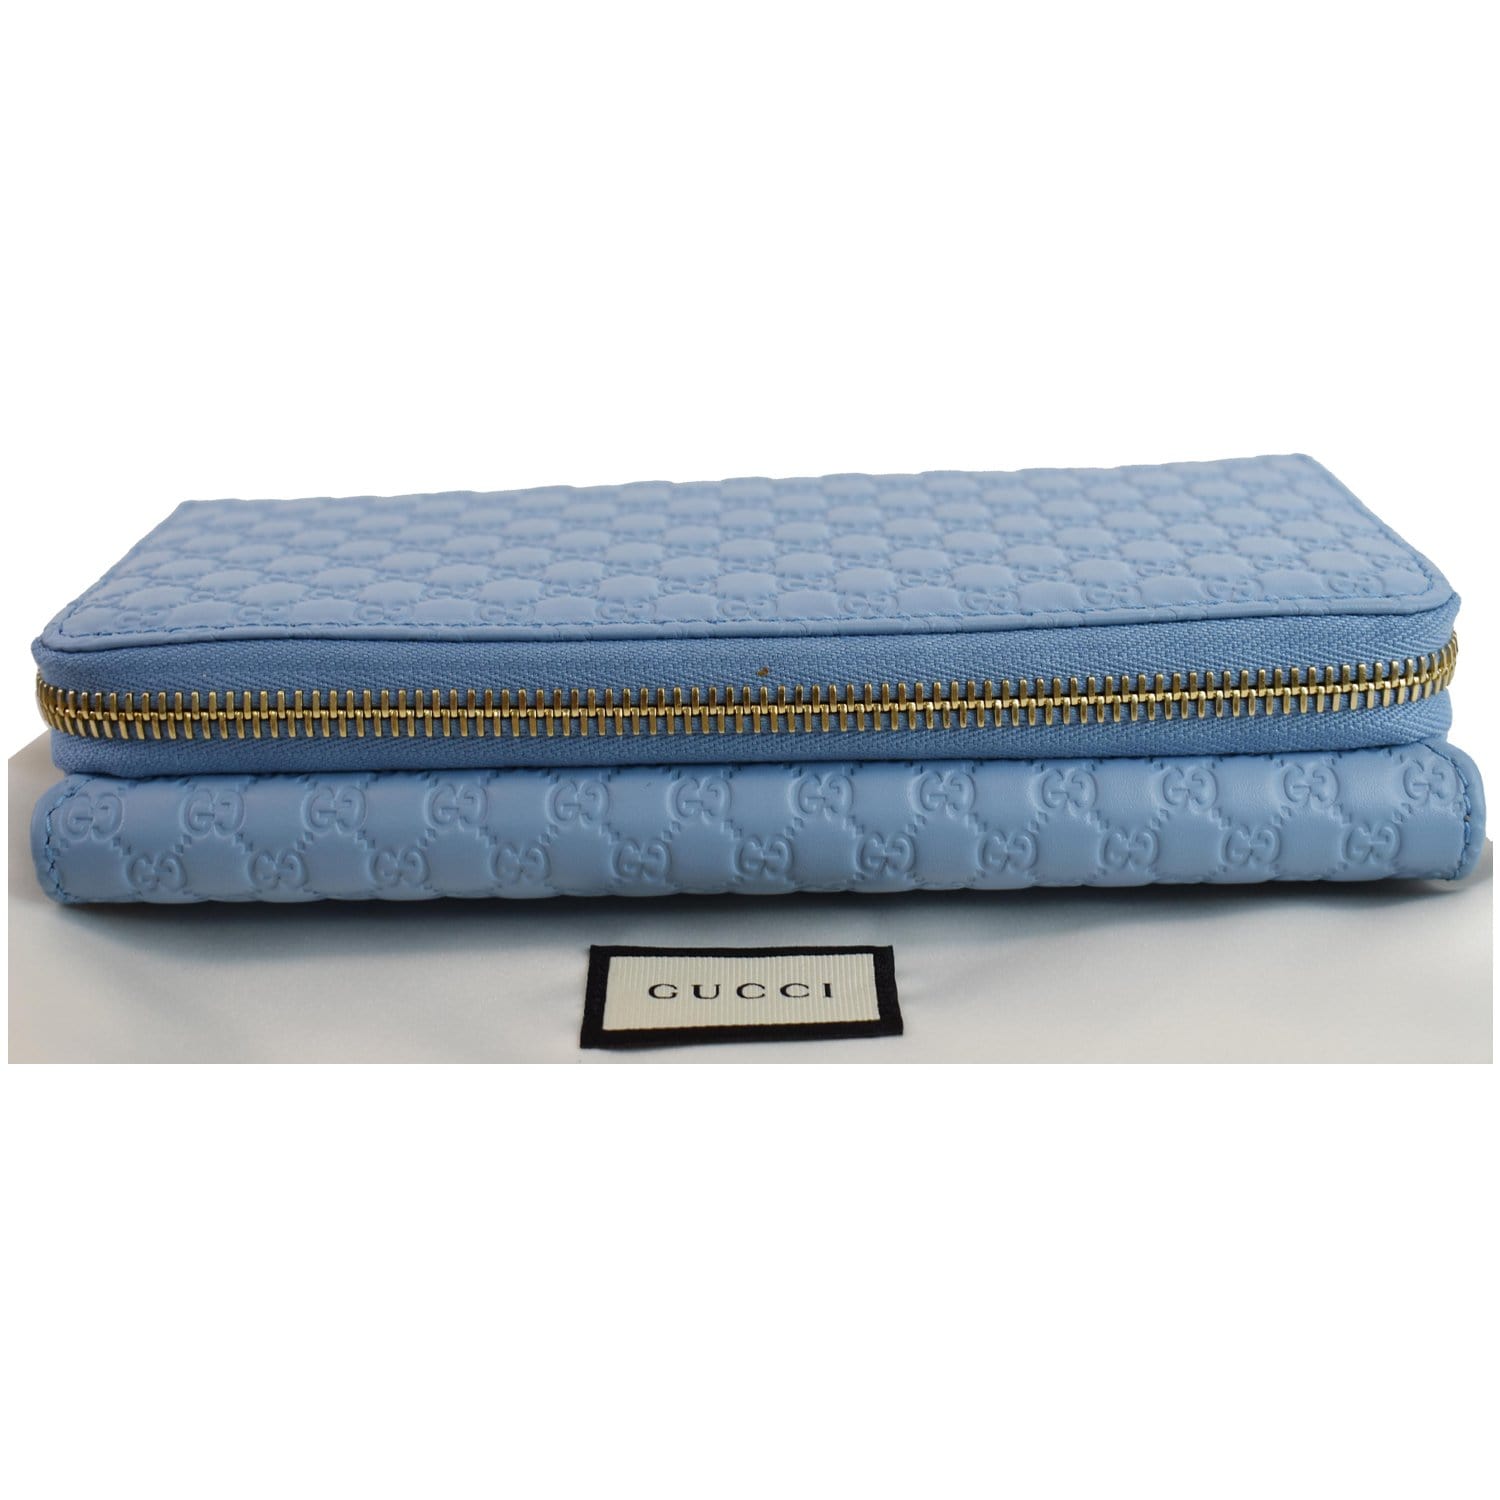 GUCCI Microguccissima Leather Wallet Light Blue 449364